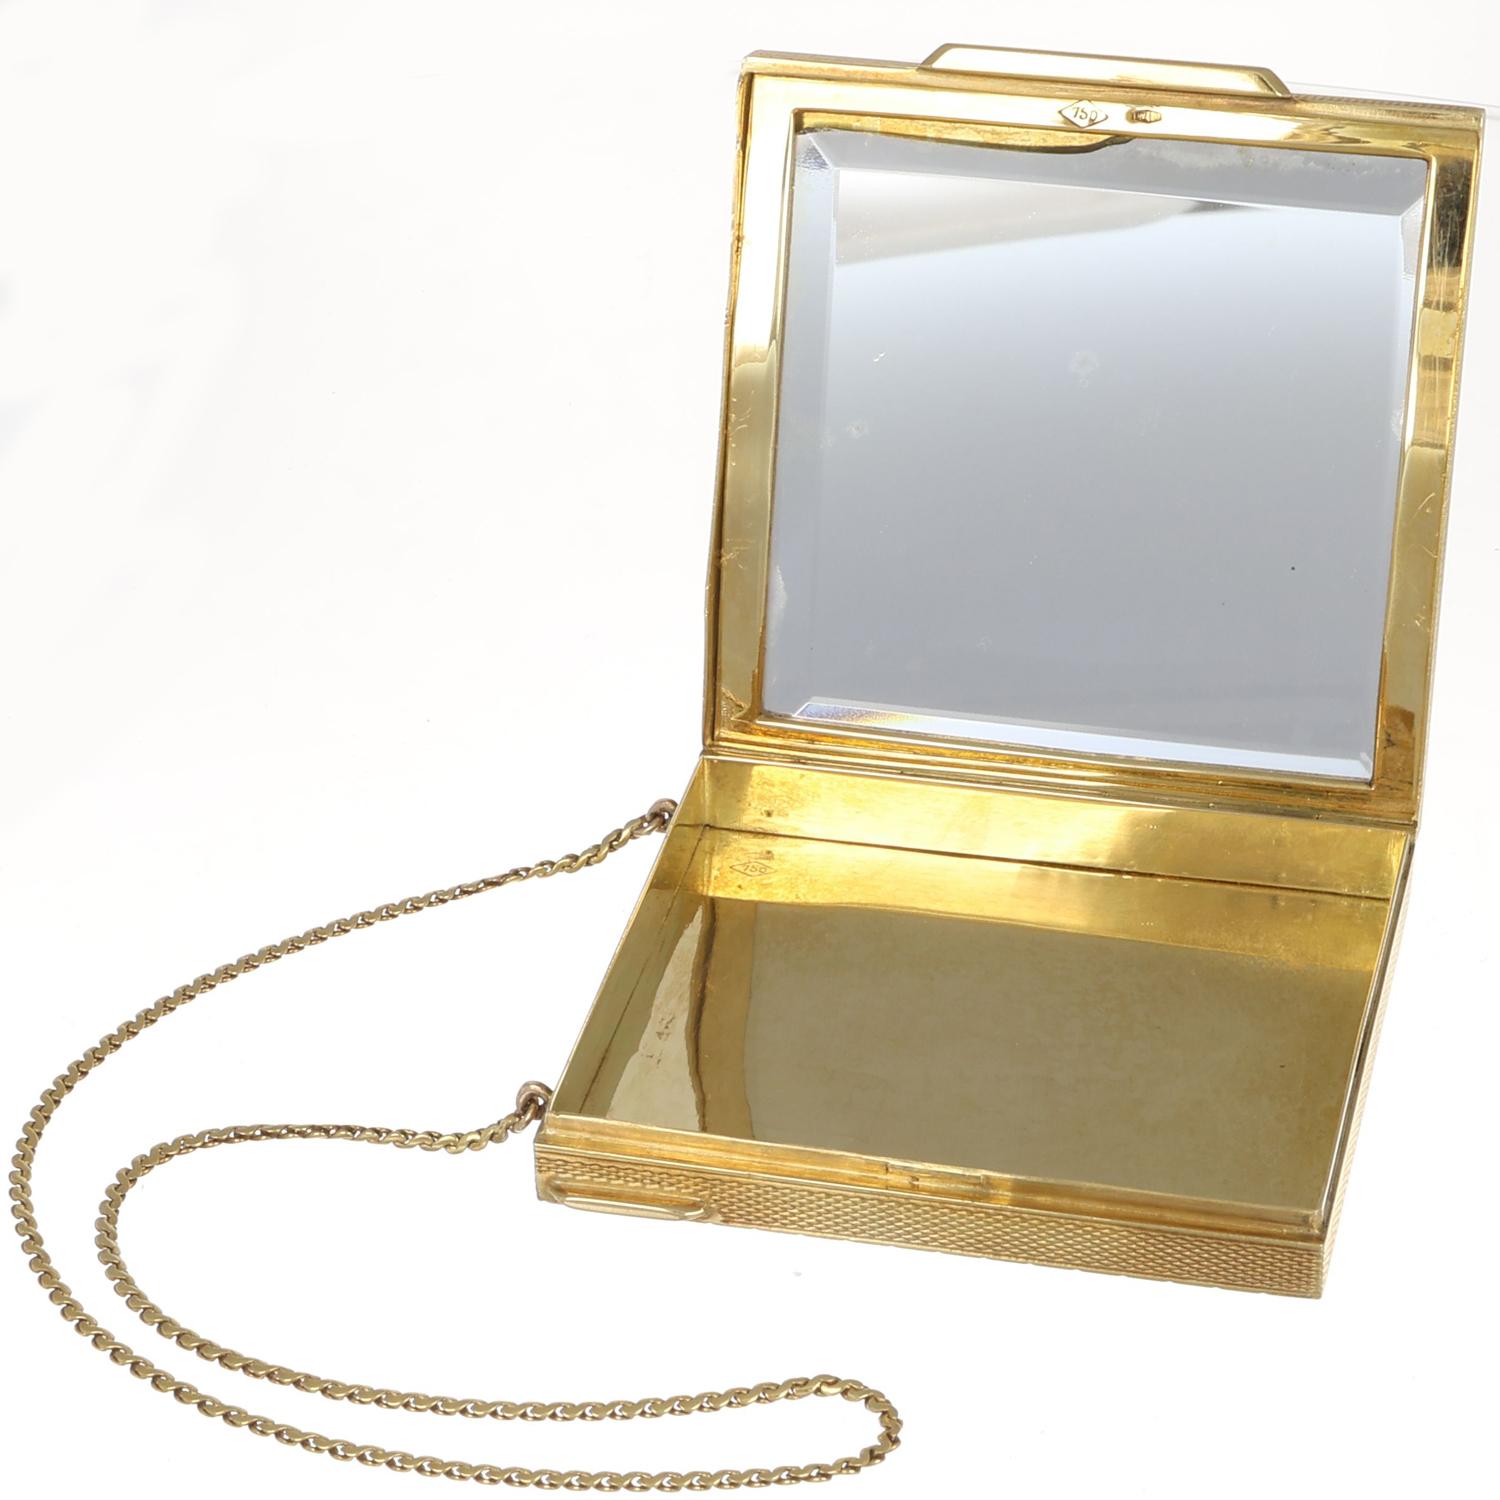 18Kt Gold Rare Compact Powder Box with Chain - Made in Italy 1970 circa  For Sale 4